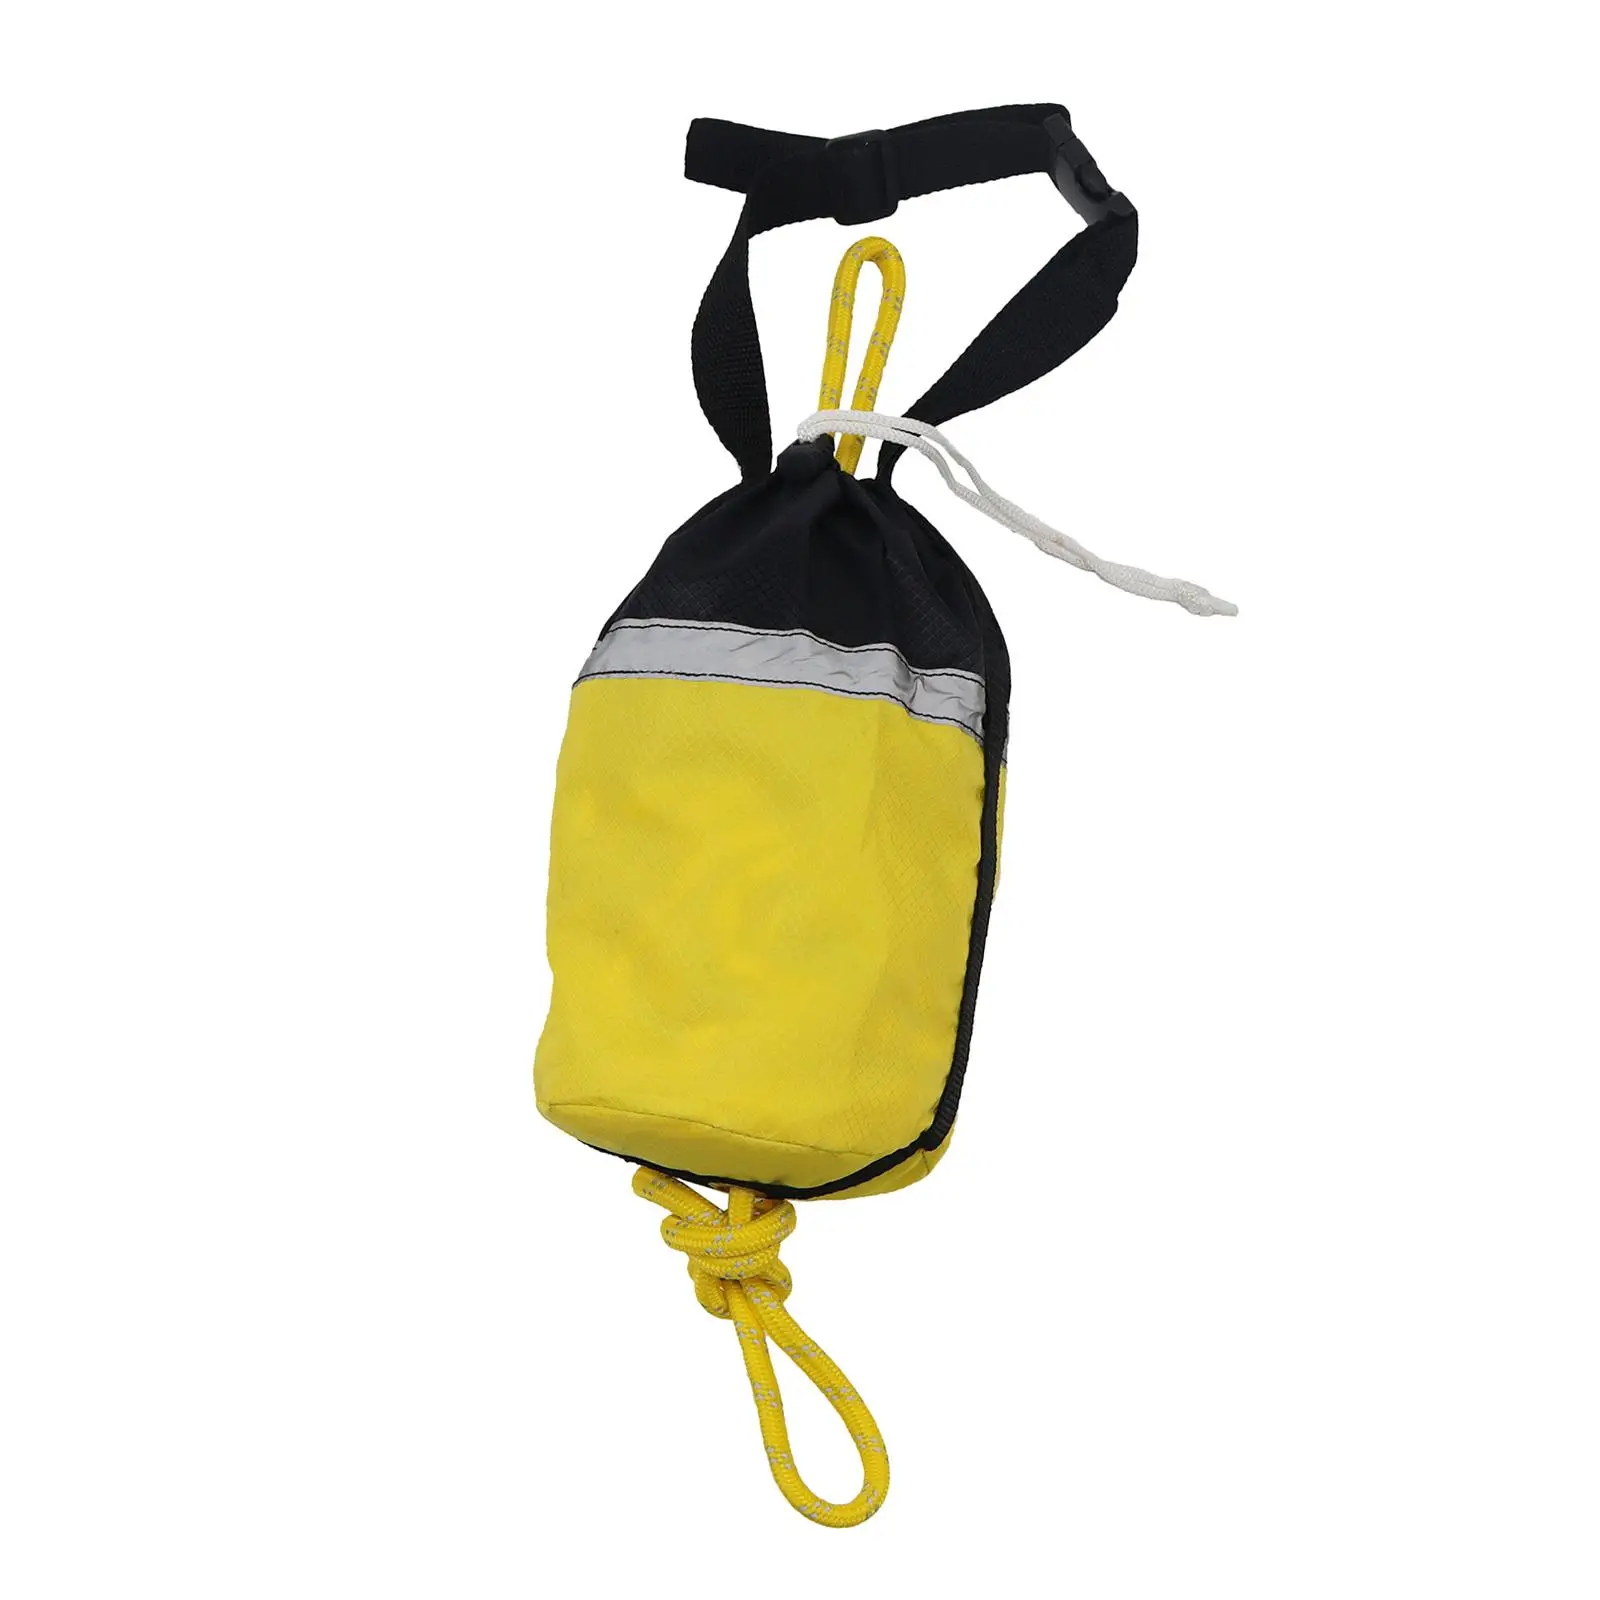 Kayaking Throw Bag Throw Rope 16M Marine High Visibility for Canoeing Boating Swimming Ice Fishing Outdoor Accessory